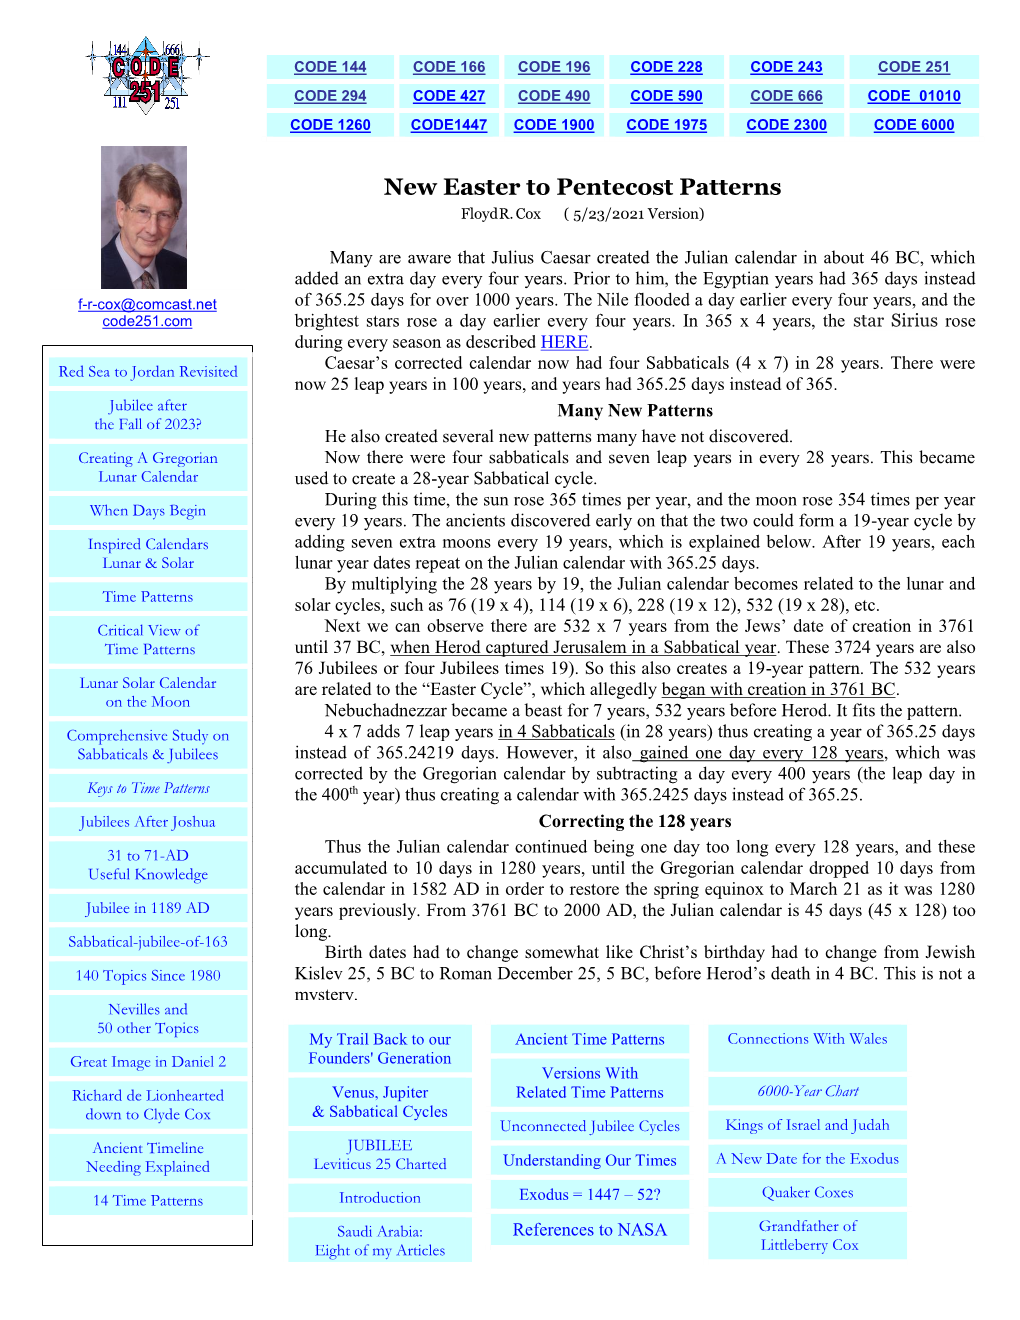 New Patterns Easter to Pentecost